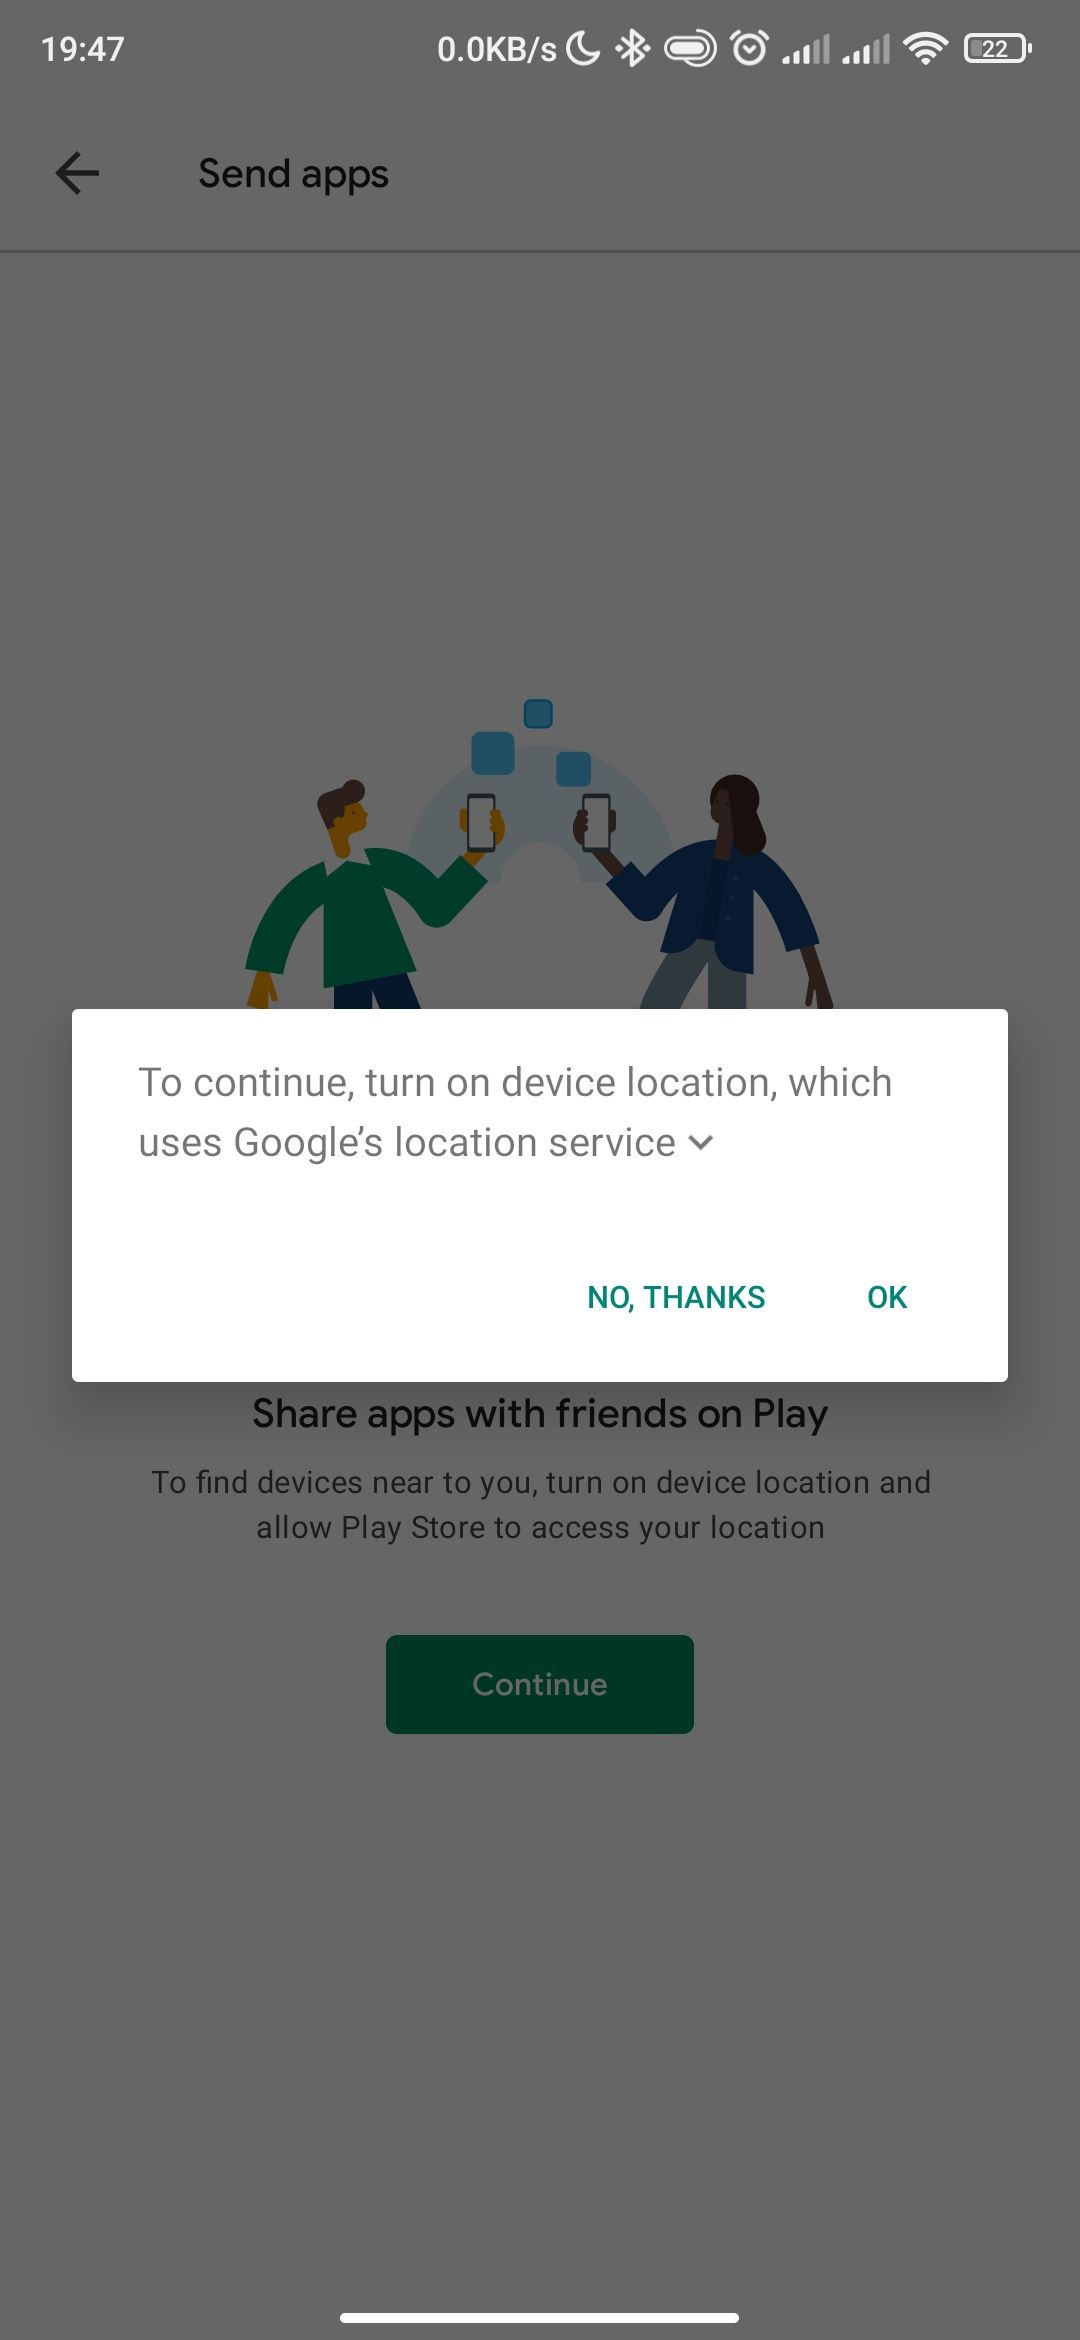 Granting Google Play Store access to location data